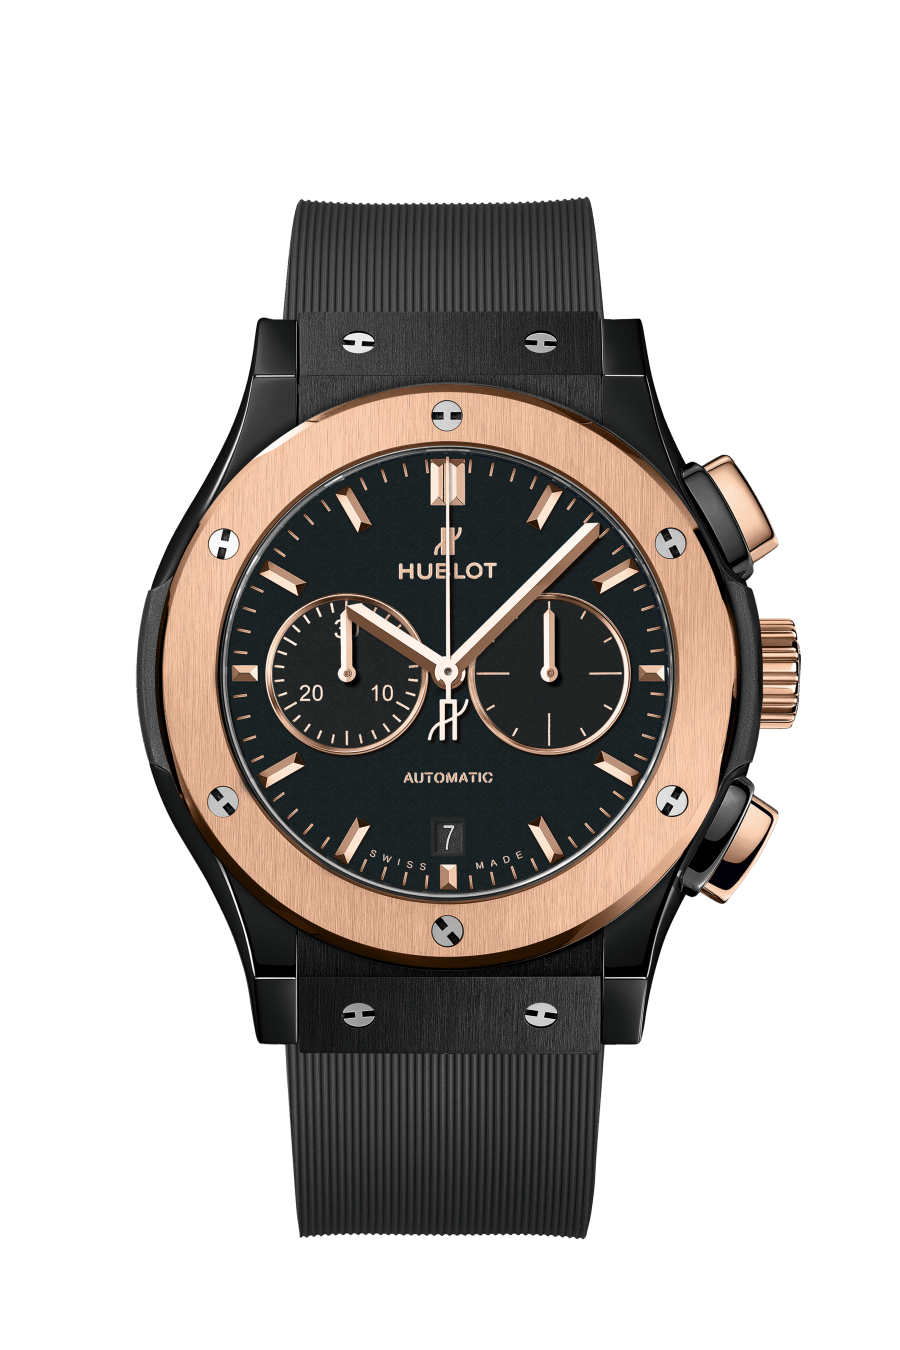 Hublot Classic Fusion Chronograph in Ceramic and Rose Gold 42mm